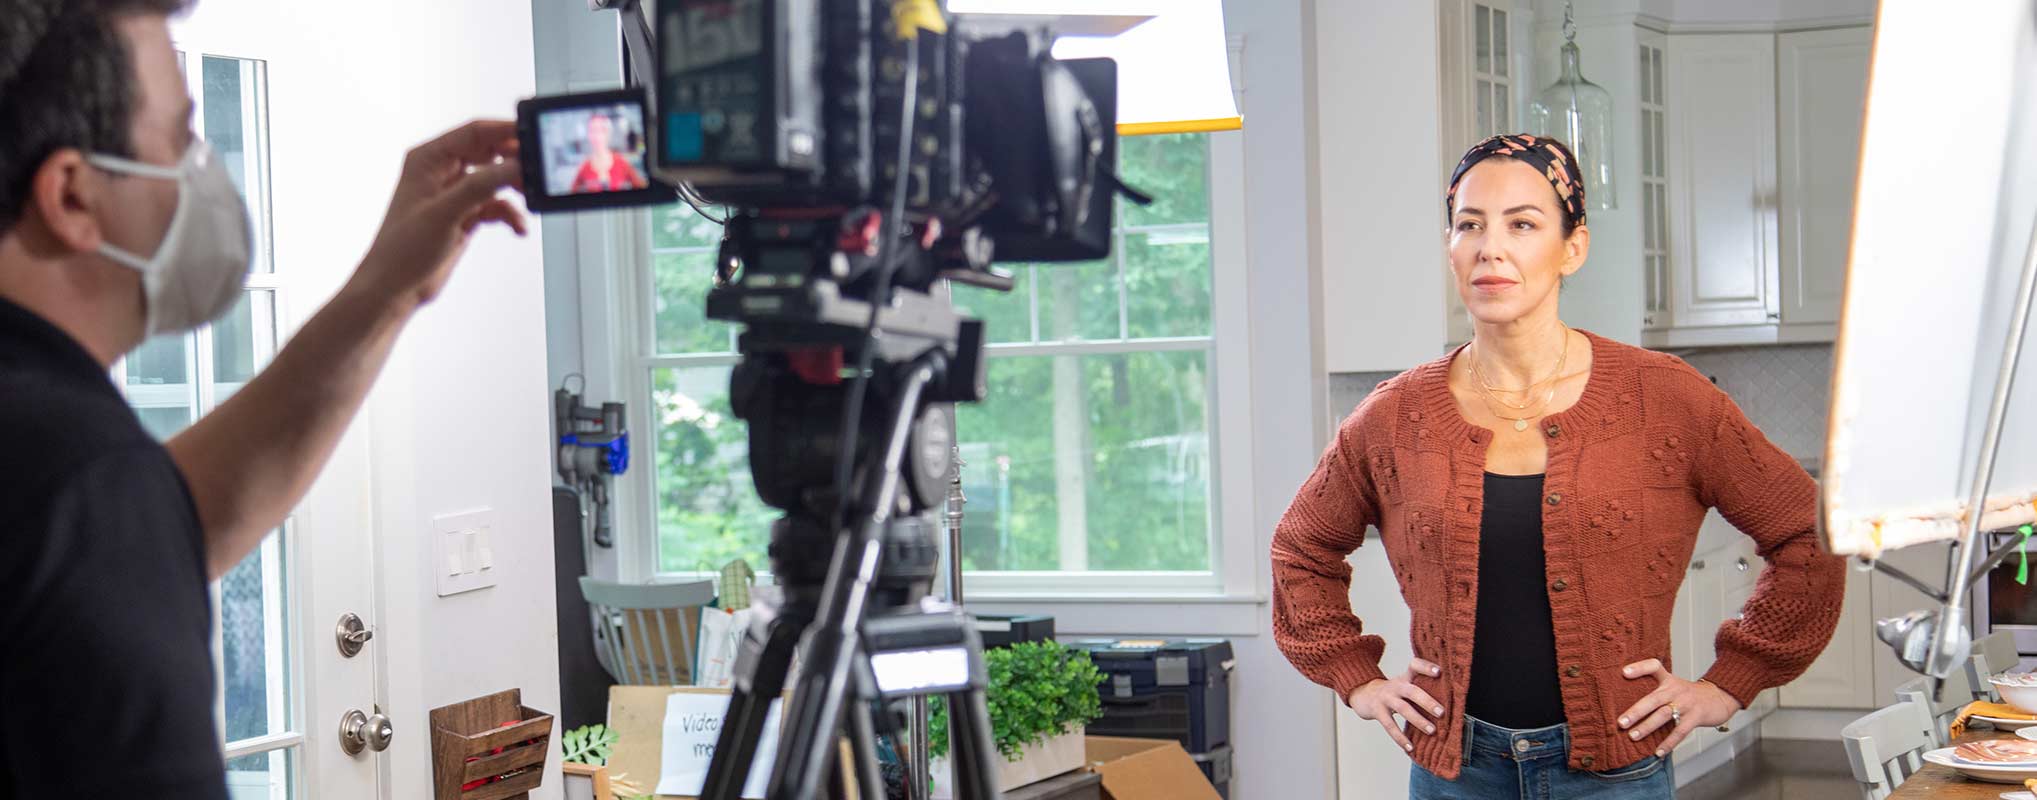 A New Jersey video production company frames up a shot of the talent